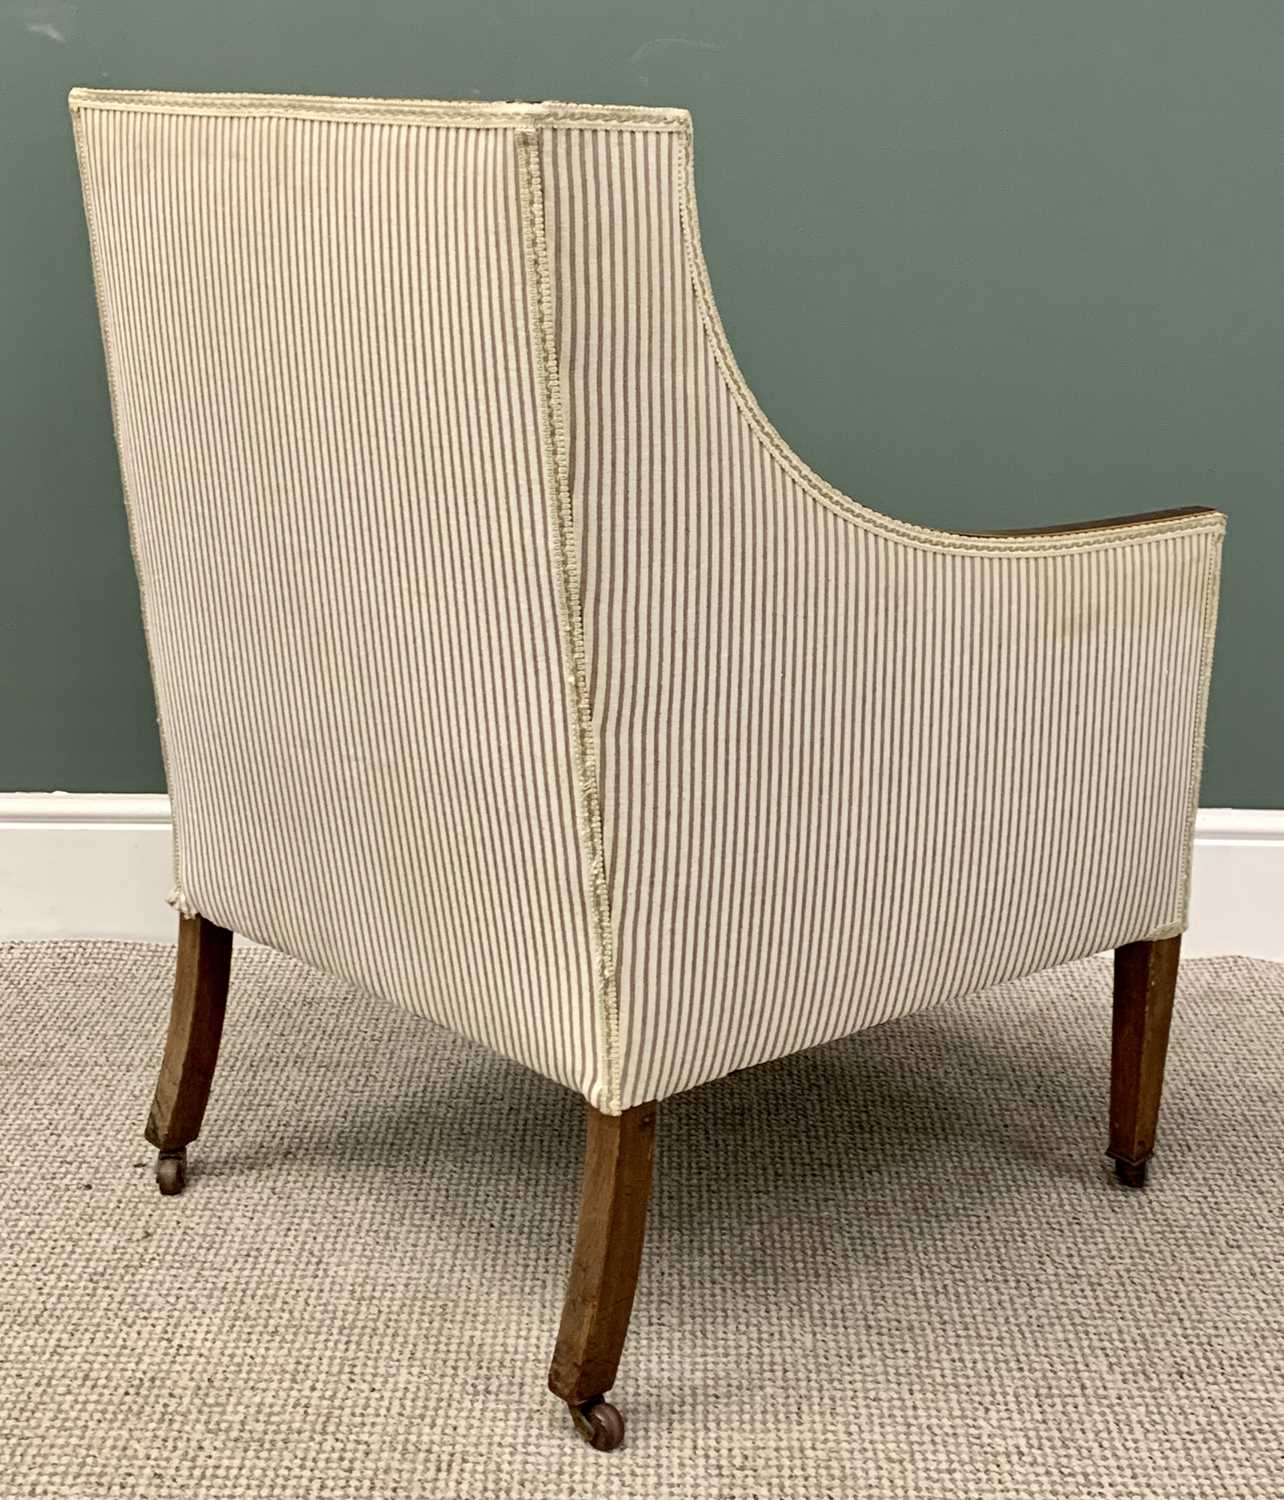 REGENCY-STYLE EDWARDIAN UPHOLSTERED EASY CHAIR in button back striped upholstery, on tapered front - Image 3 of 3